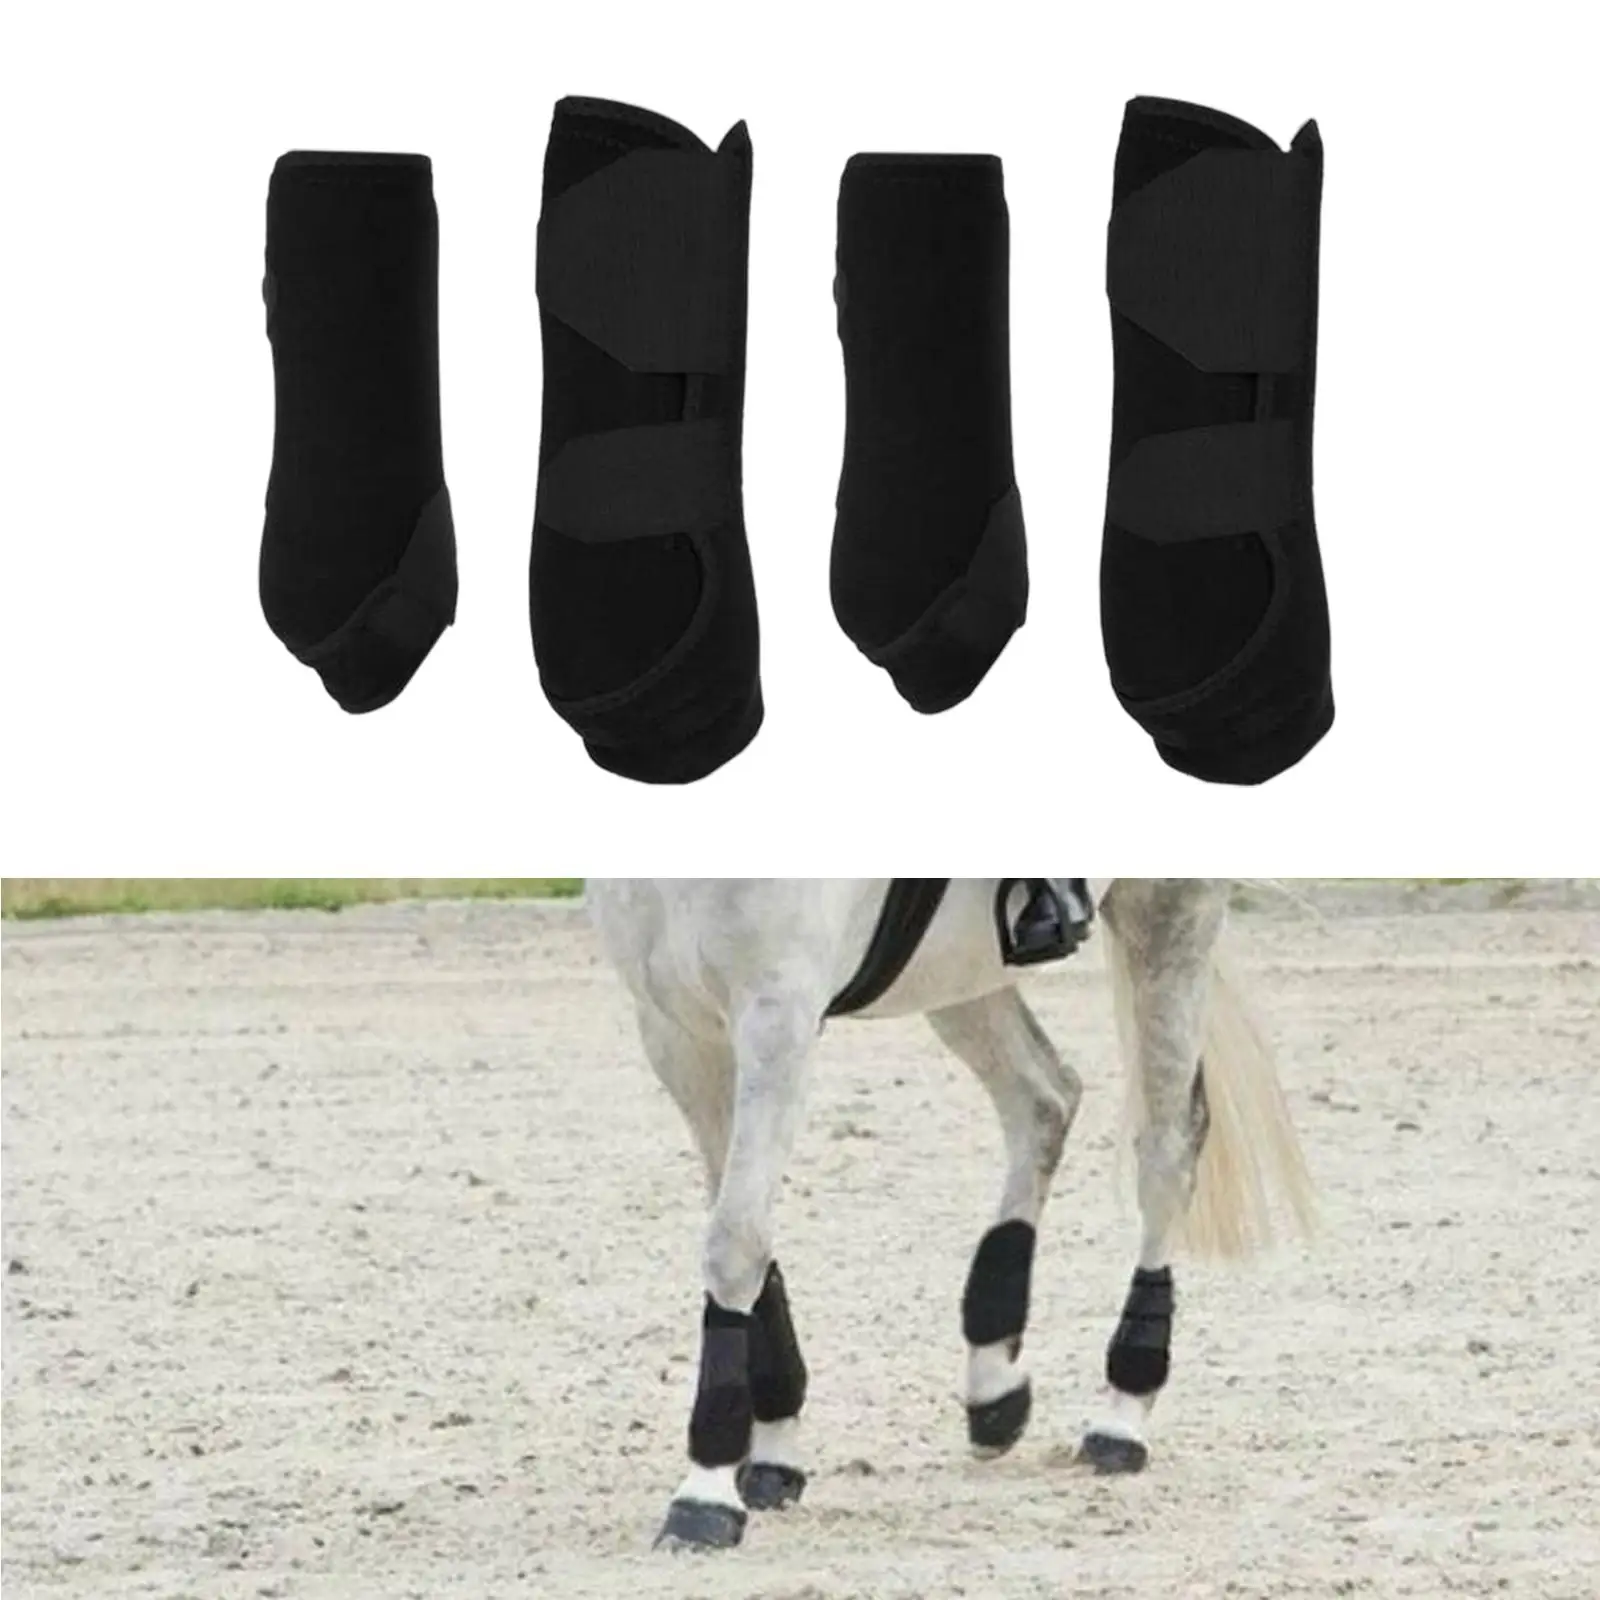 

4x Neoprene Horse Boots Leg Protection Wraps Shockproof Protector Gear for Jumping Training Riding Equestrian Equipment